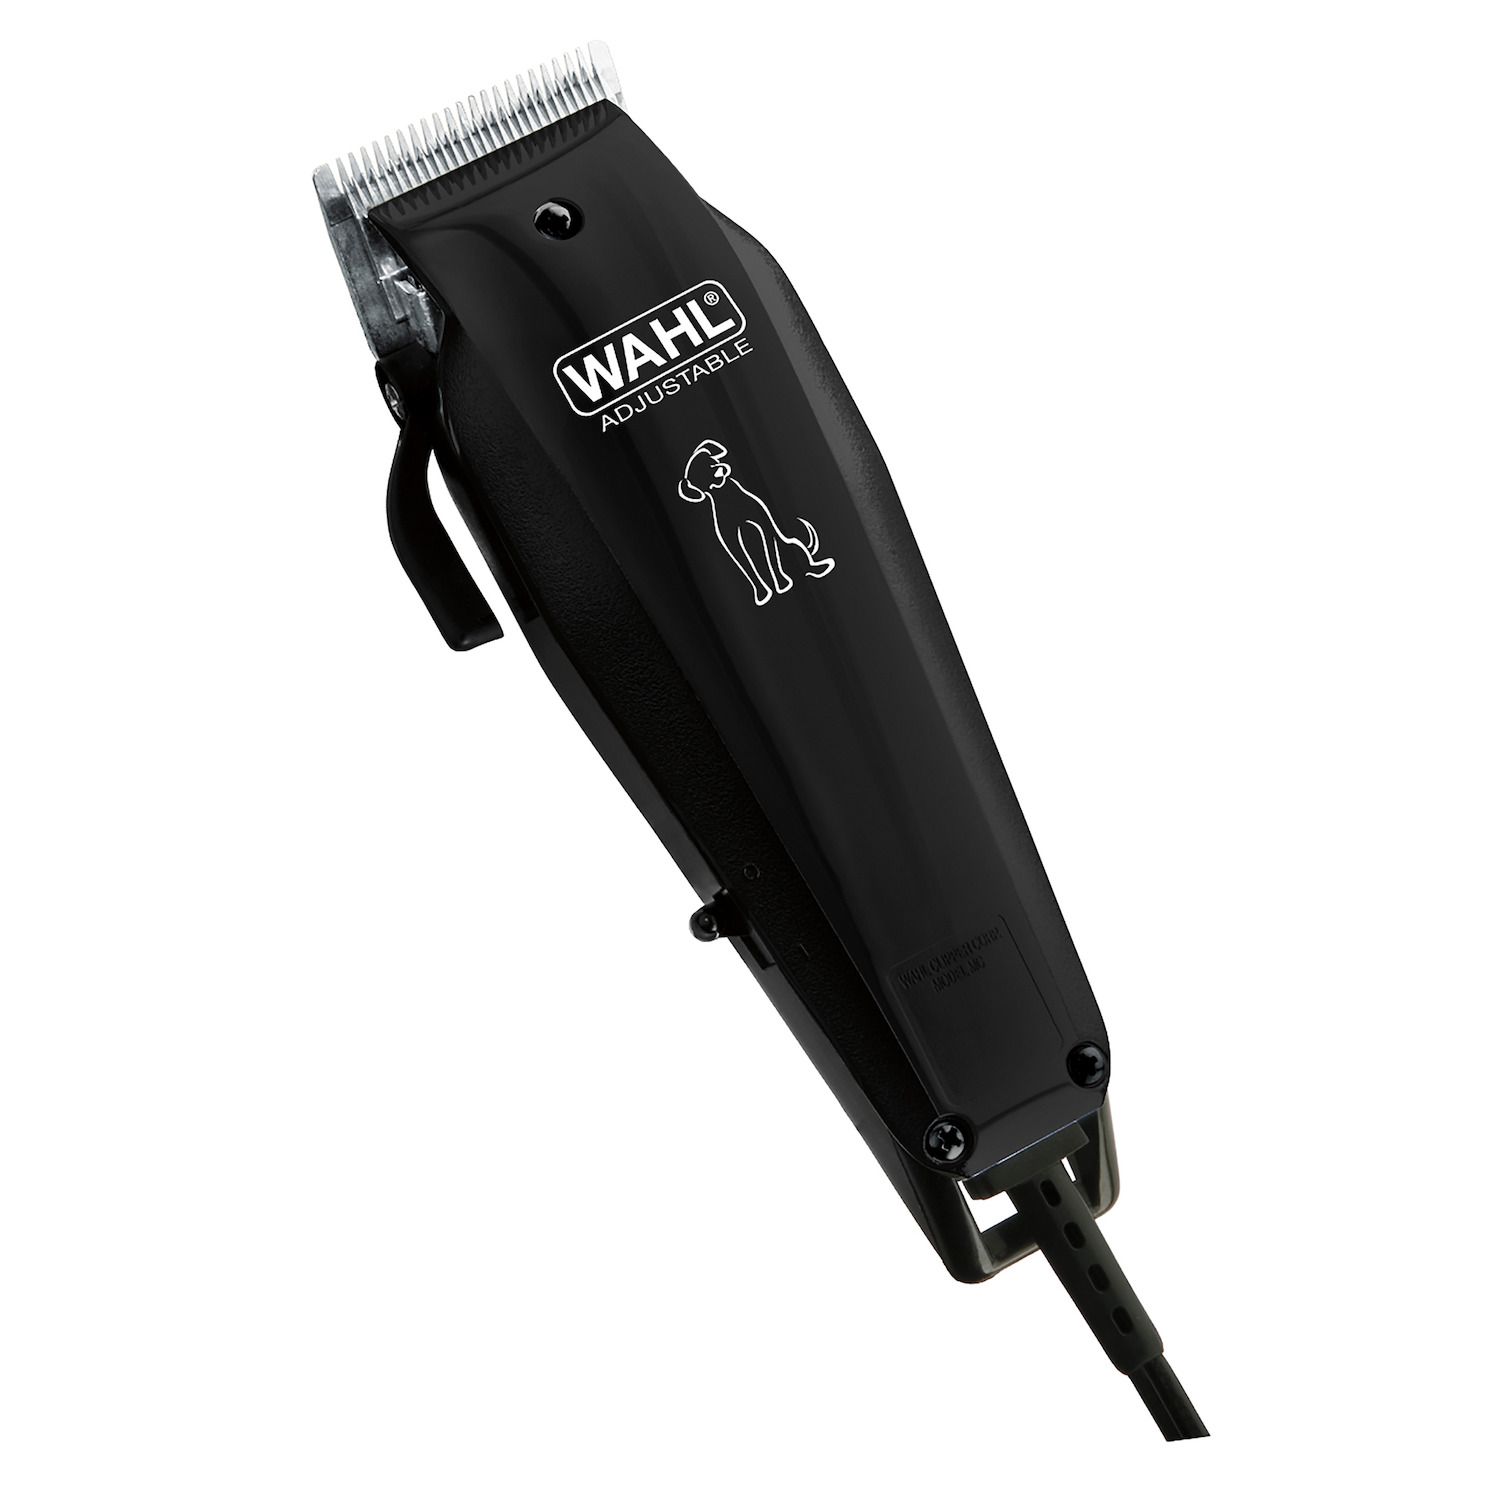 wahl clippers kohls